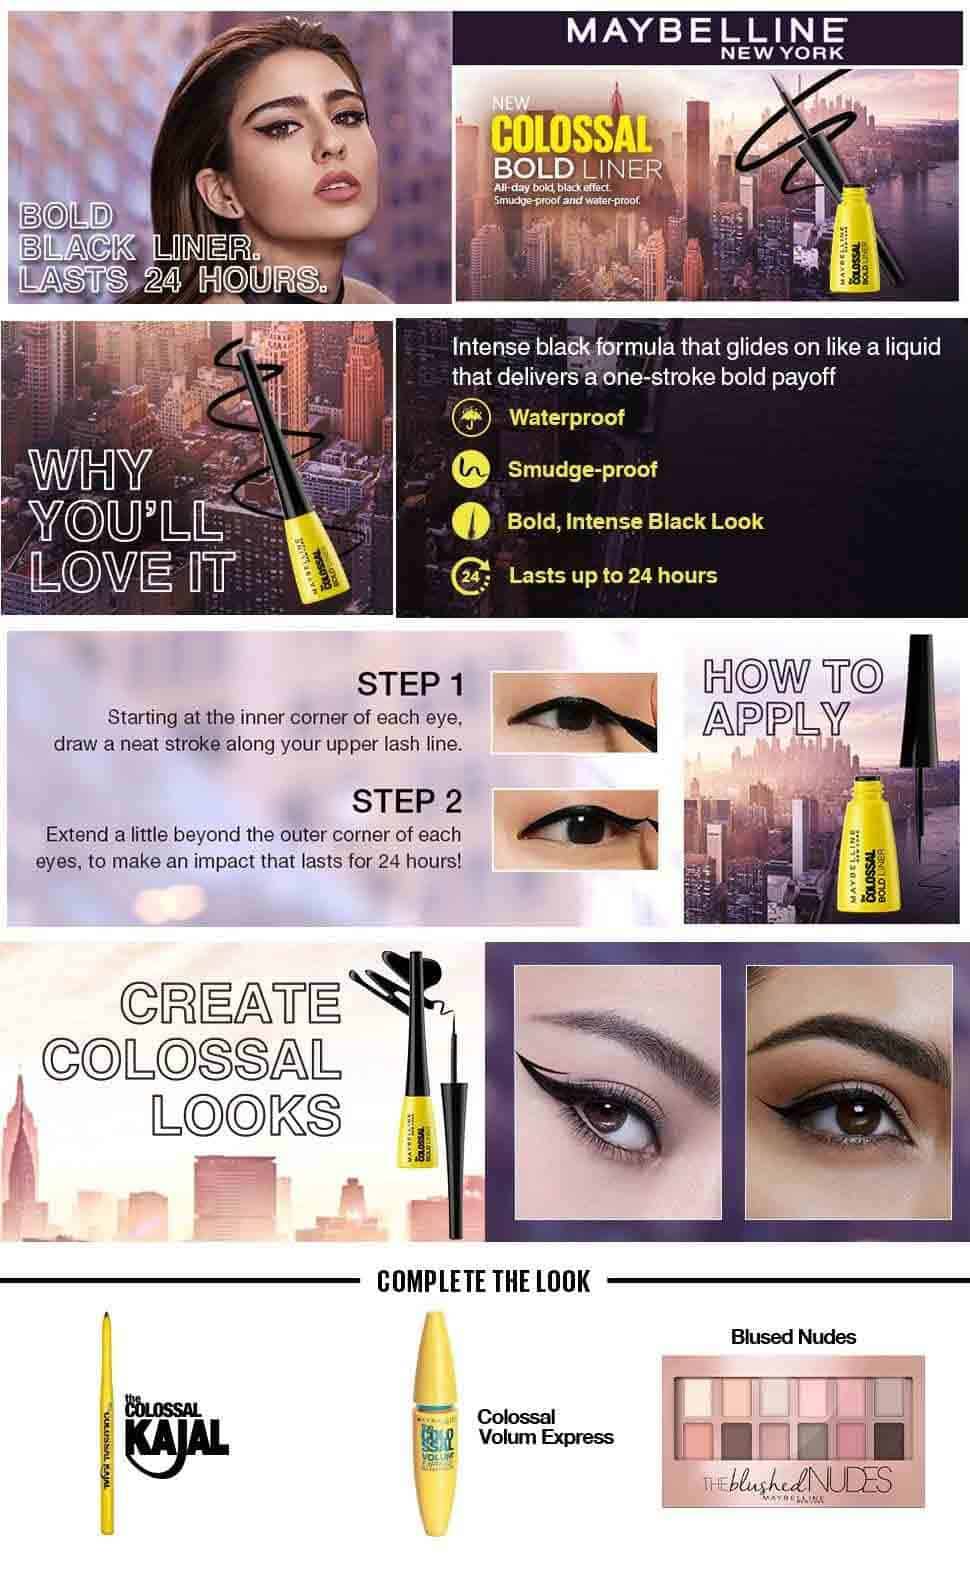 MAYBELLINE COLOSSAL BOLD LINER